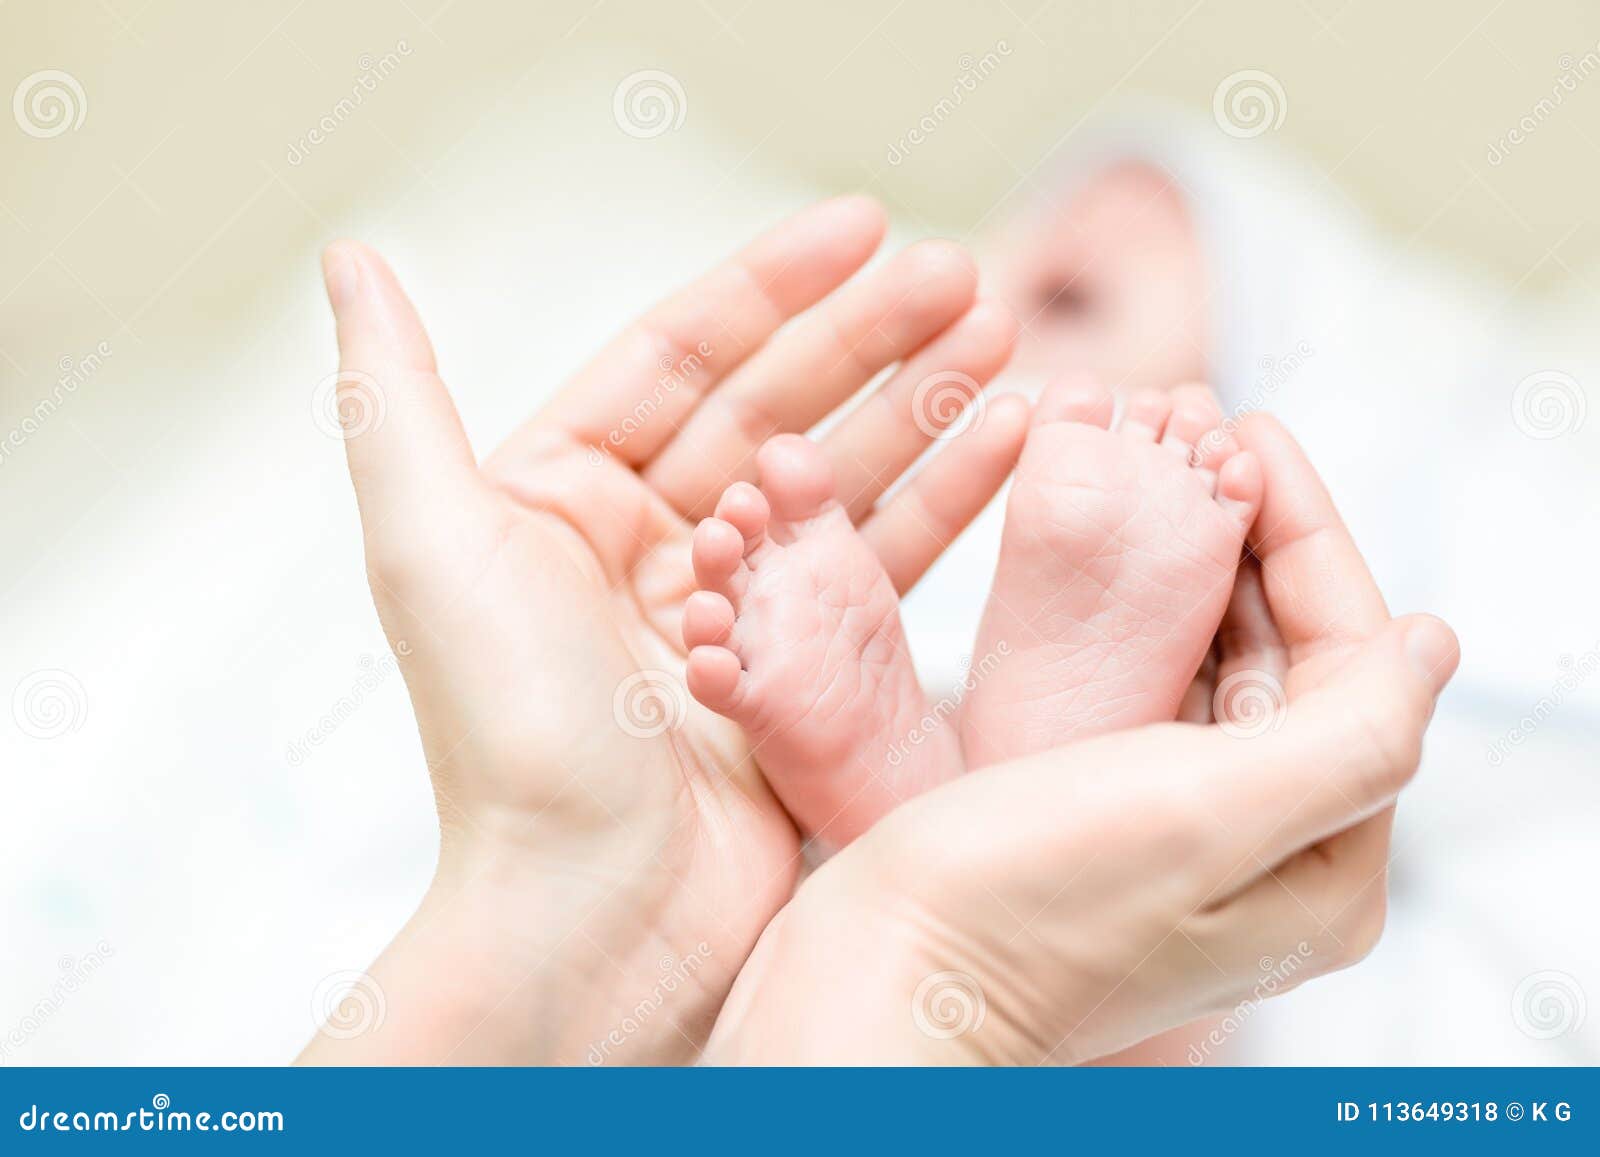 mother holding feet of newborn baby. infant legs in parent hand. child support and care. happy family